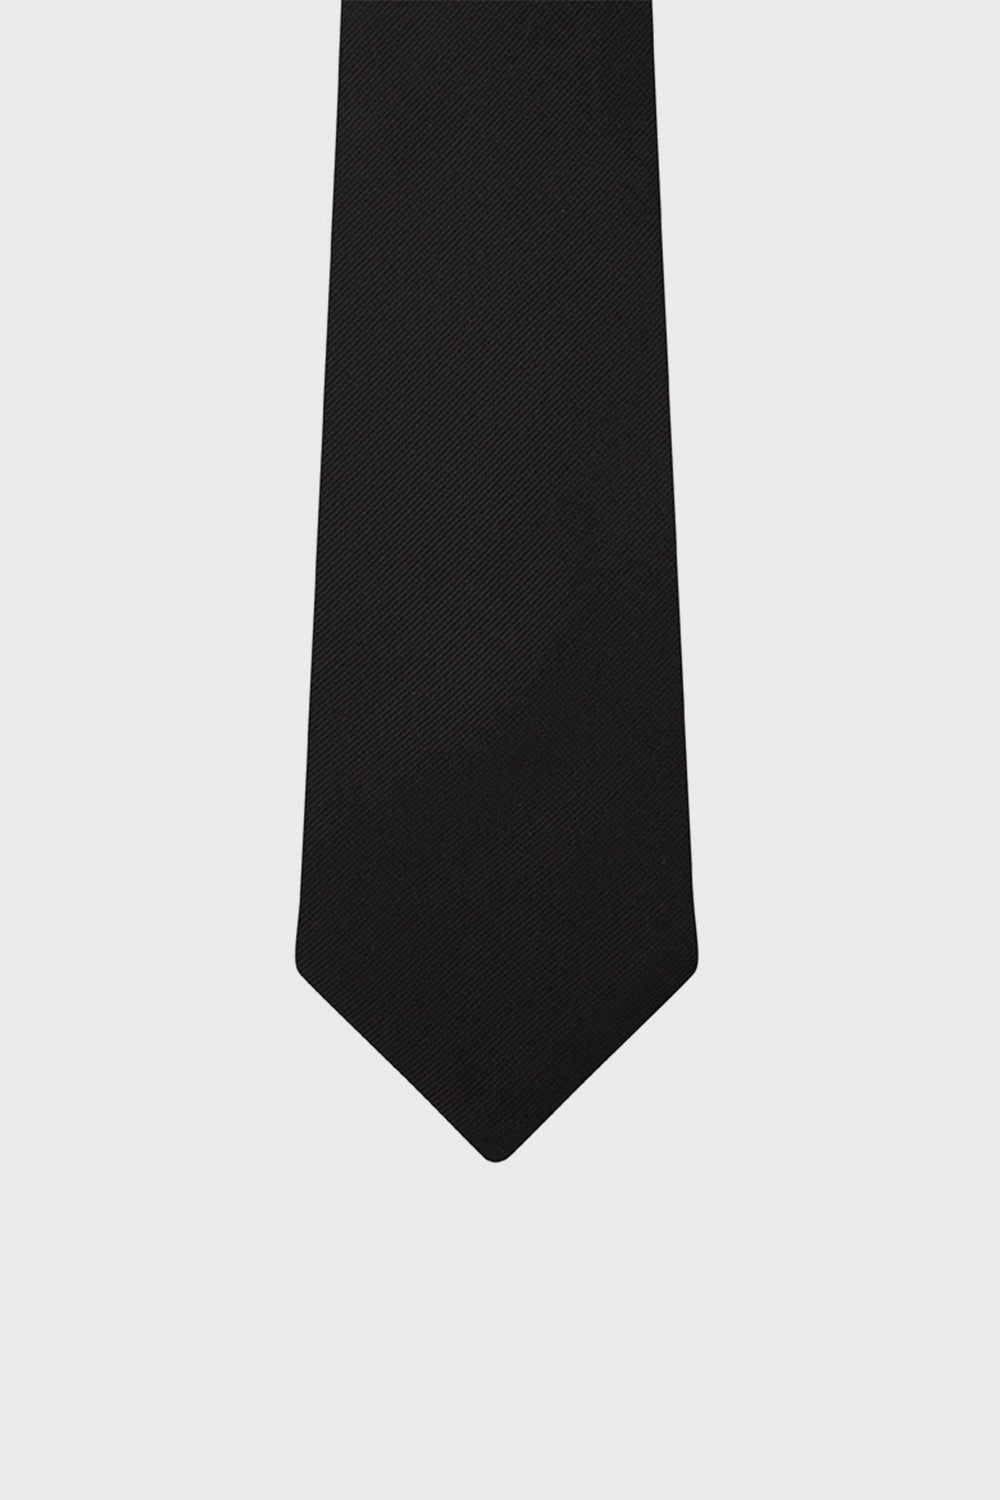 Royal Navy Officers Tie - Silk Reppe